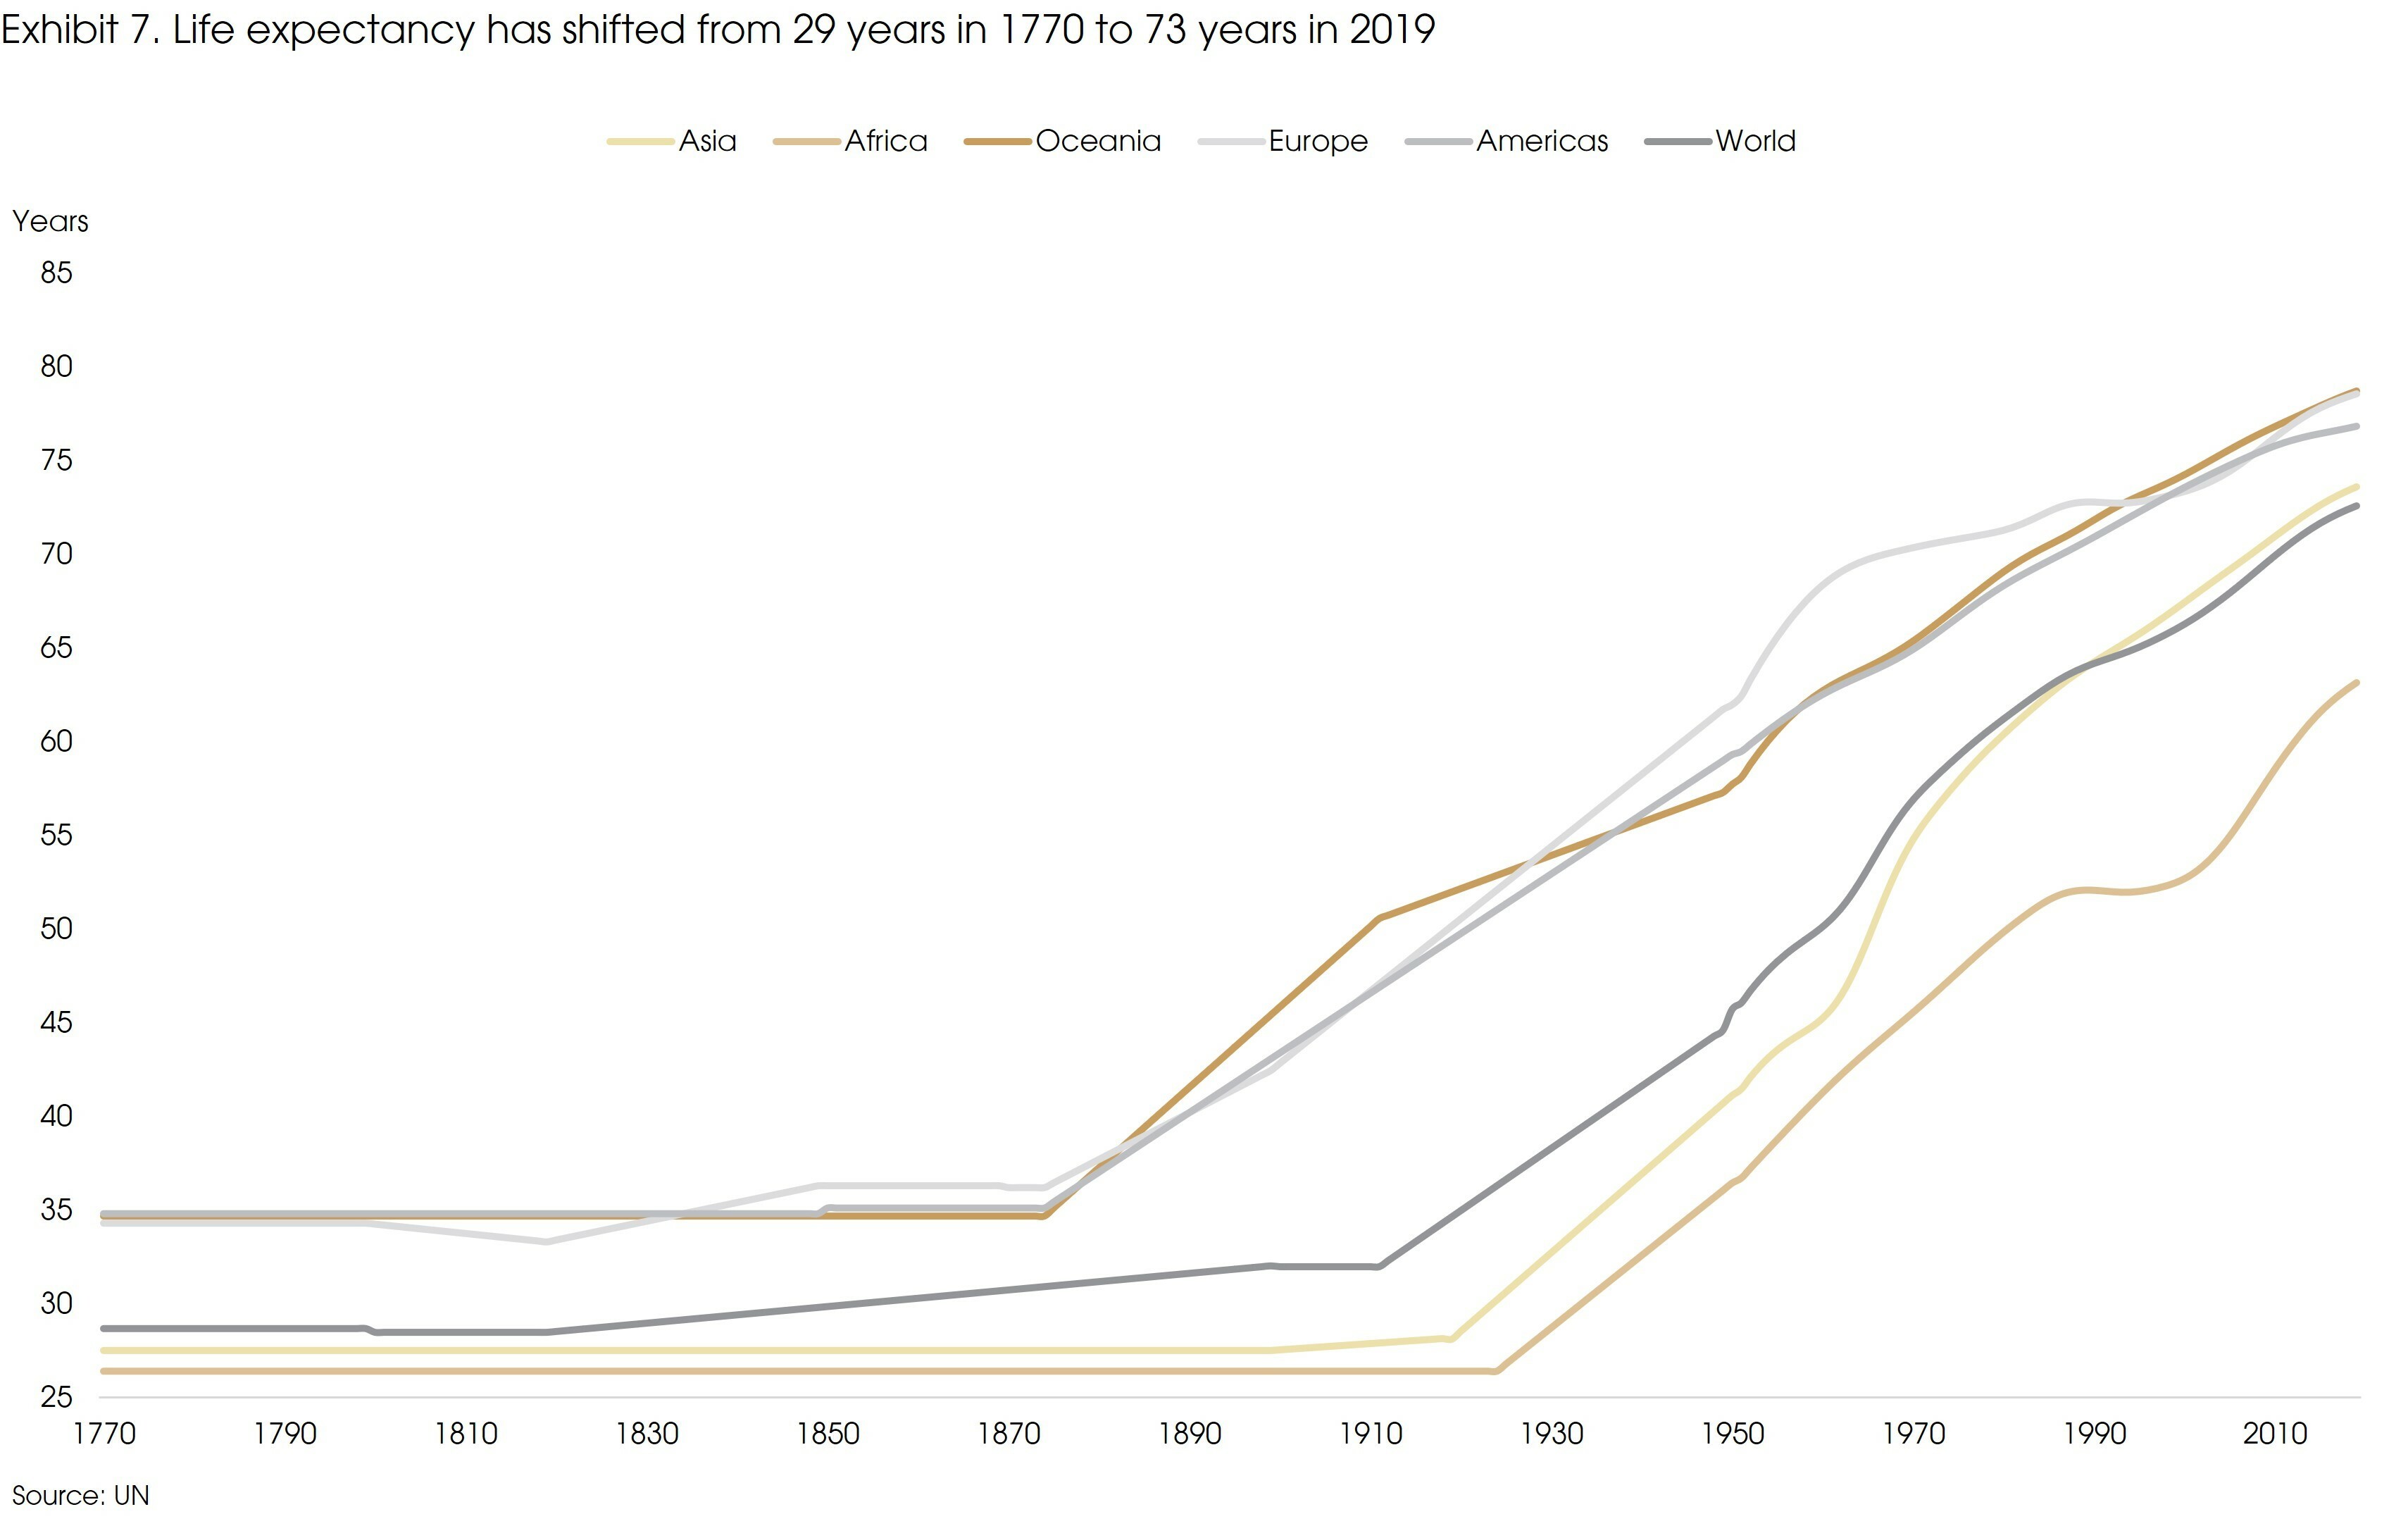 Exhibit 7 Life Expectancy Has Shifted From 29 Years in 1770 to 73 Years in 2019